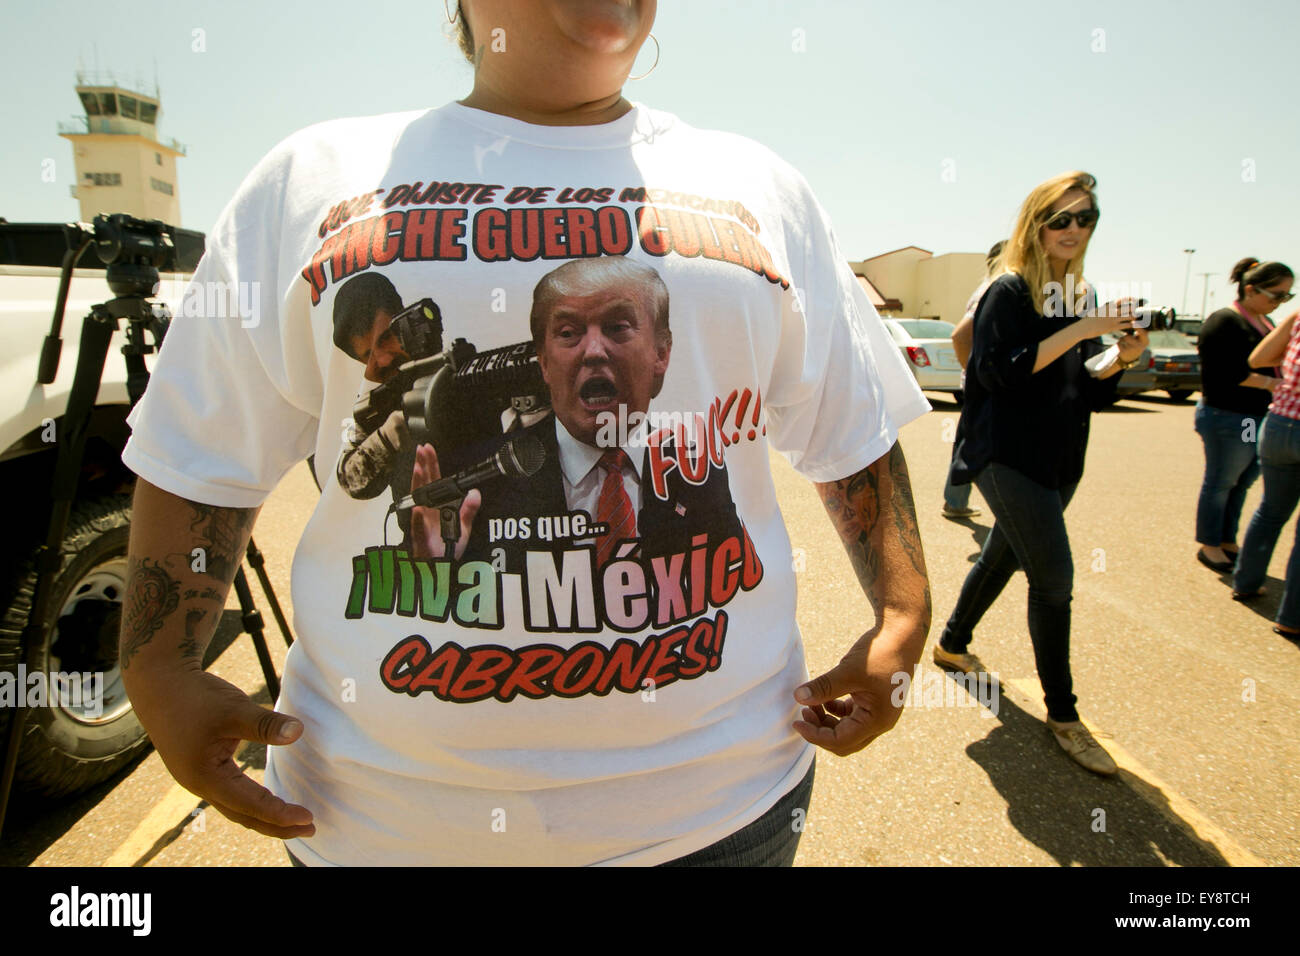 Laredo, Texas, USA. 22nd July, 2015. Pricilla Villarreal, wears a t-shirt with which includes insults for Mr. Trump and images of Mexican drug trafficker El Chapo Guzman before the expected arrival of the US Presidential candidate Donald Trump on July 23rd, 2015 Stock Photo